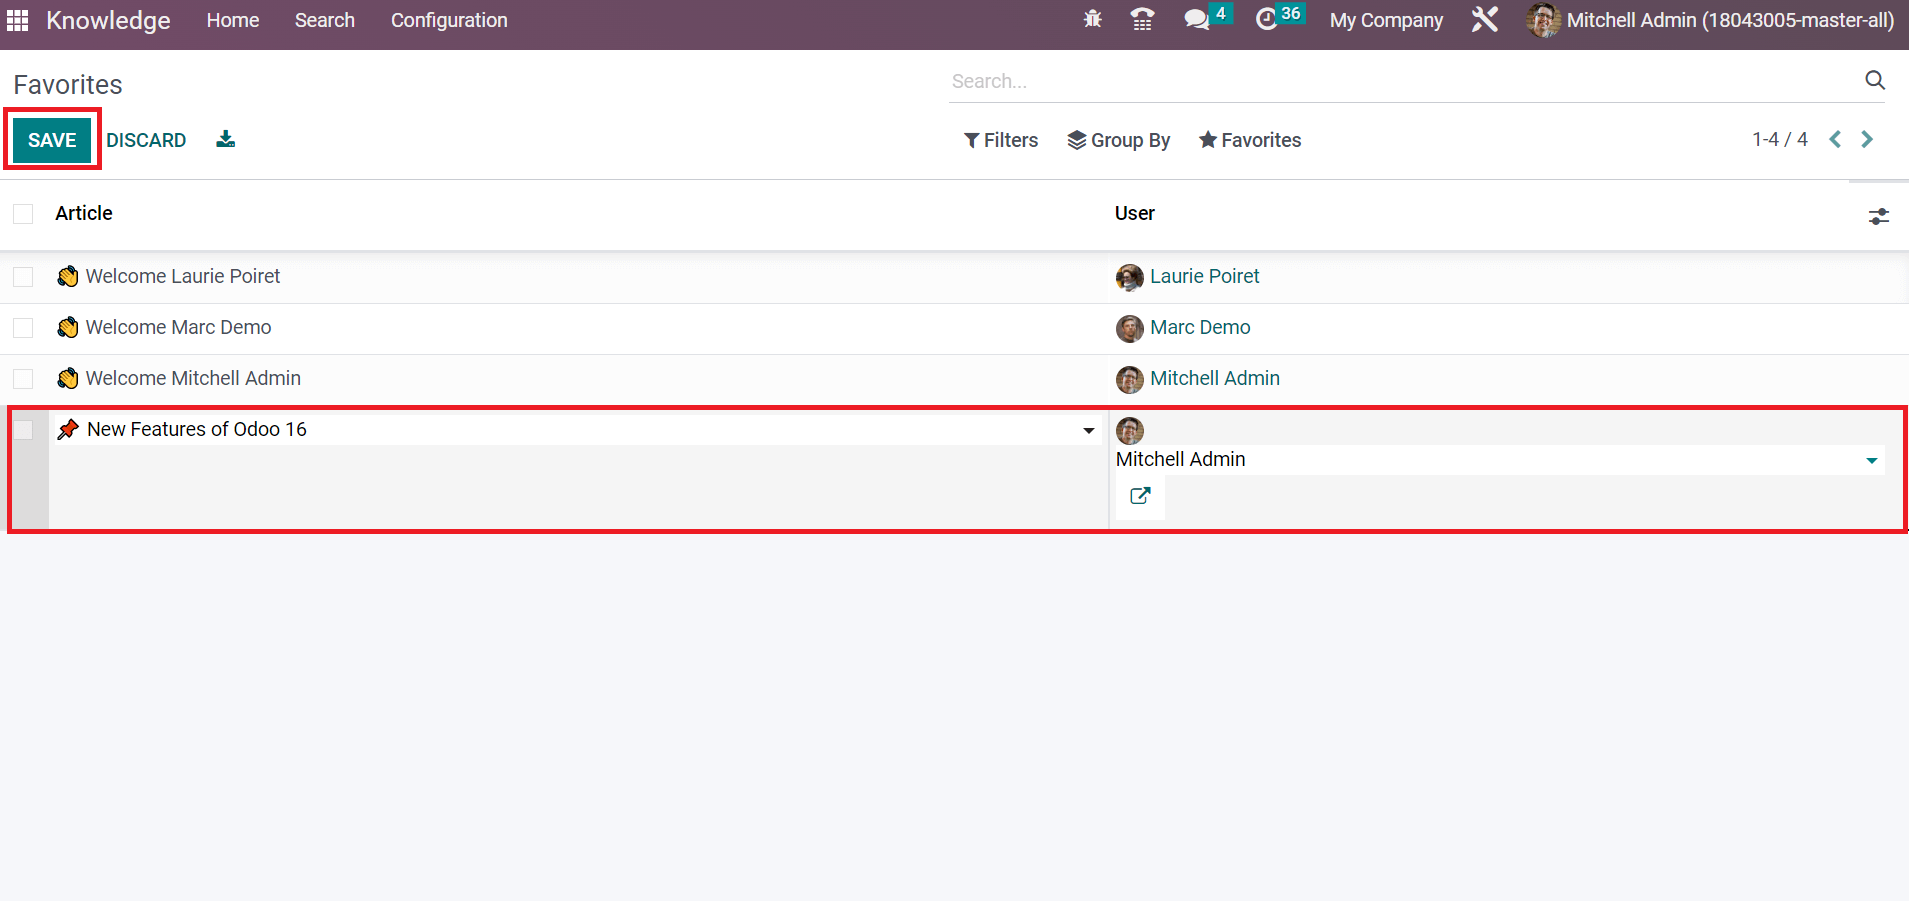 how-to-add-members-share-set-permission-on-odoo-16-knowledge-cybrosys